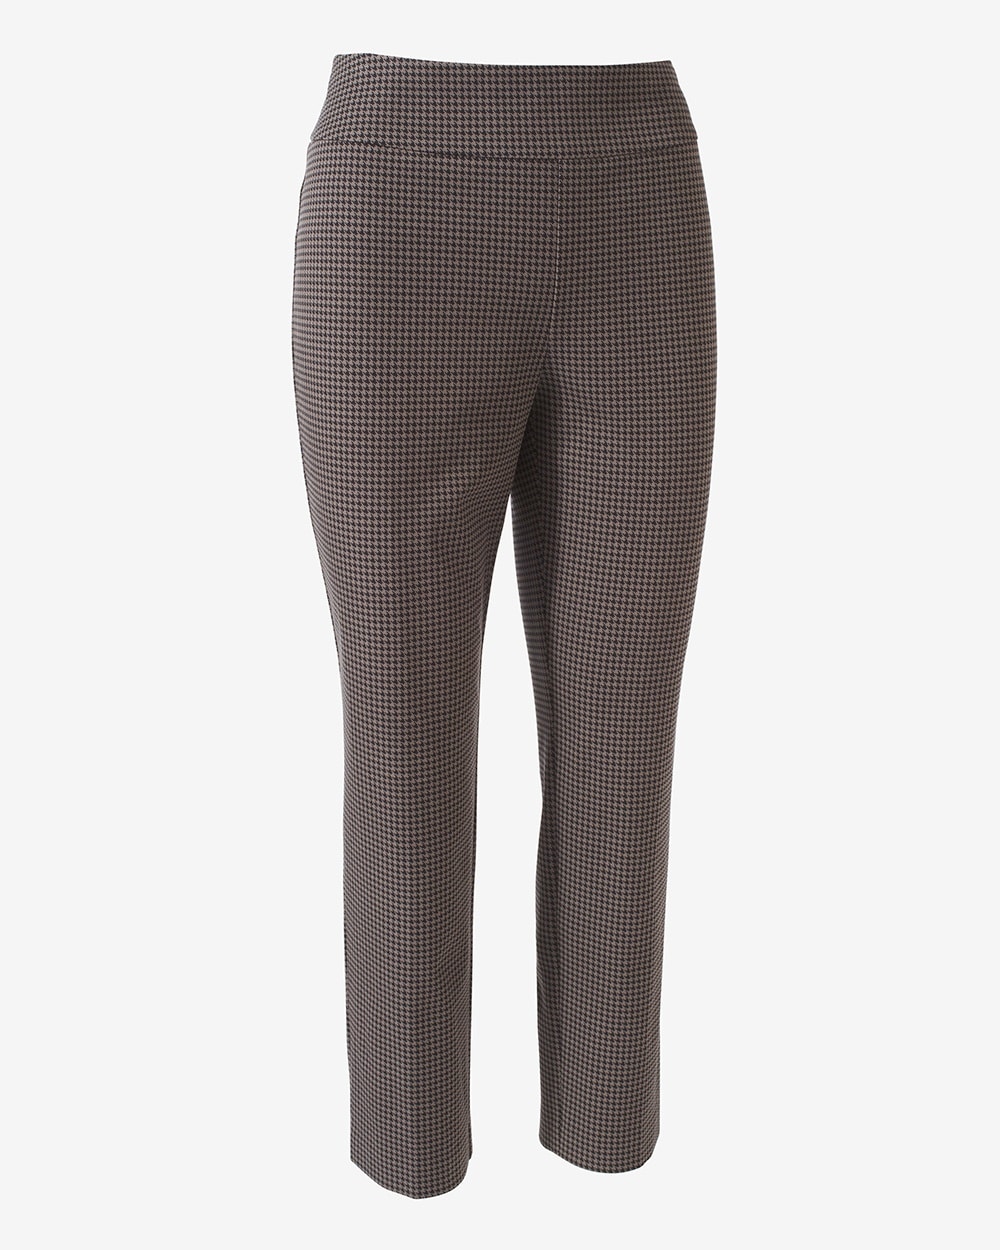 Fabulously Slimming Houndstooth Check Pull-On Ankle Pants